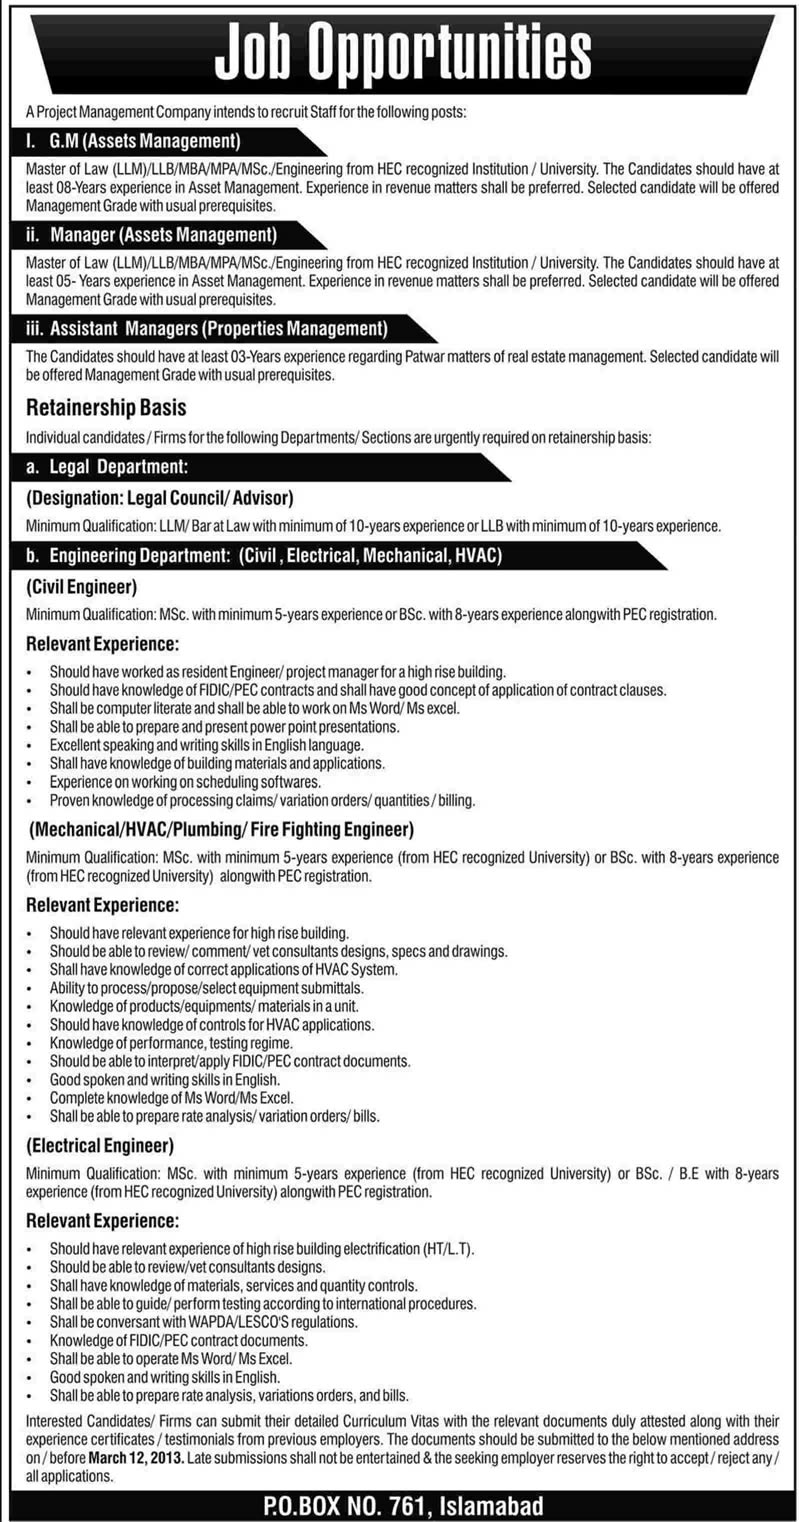 PO Box 761 Islamabad Jobs 2013 for Engineers, Managers, Legal Advisor & Staff